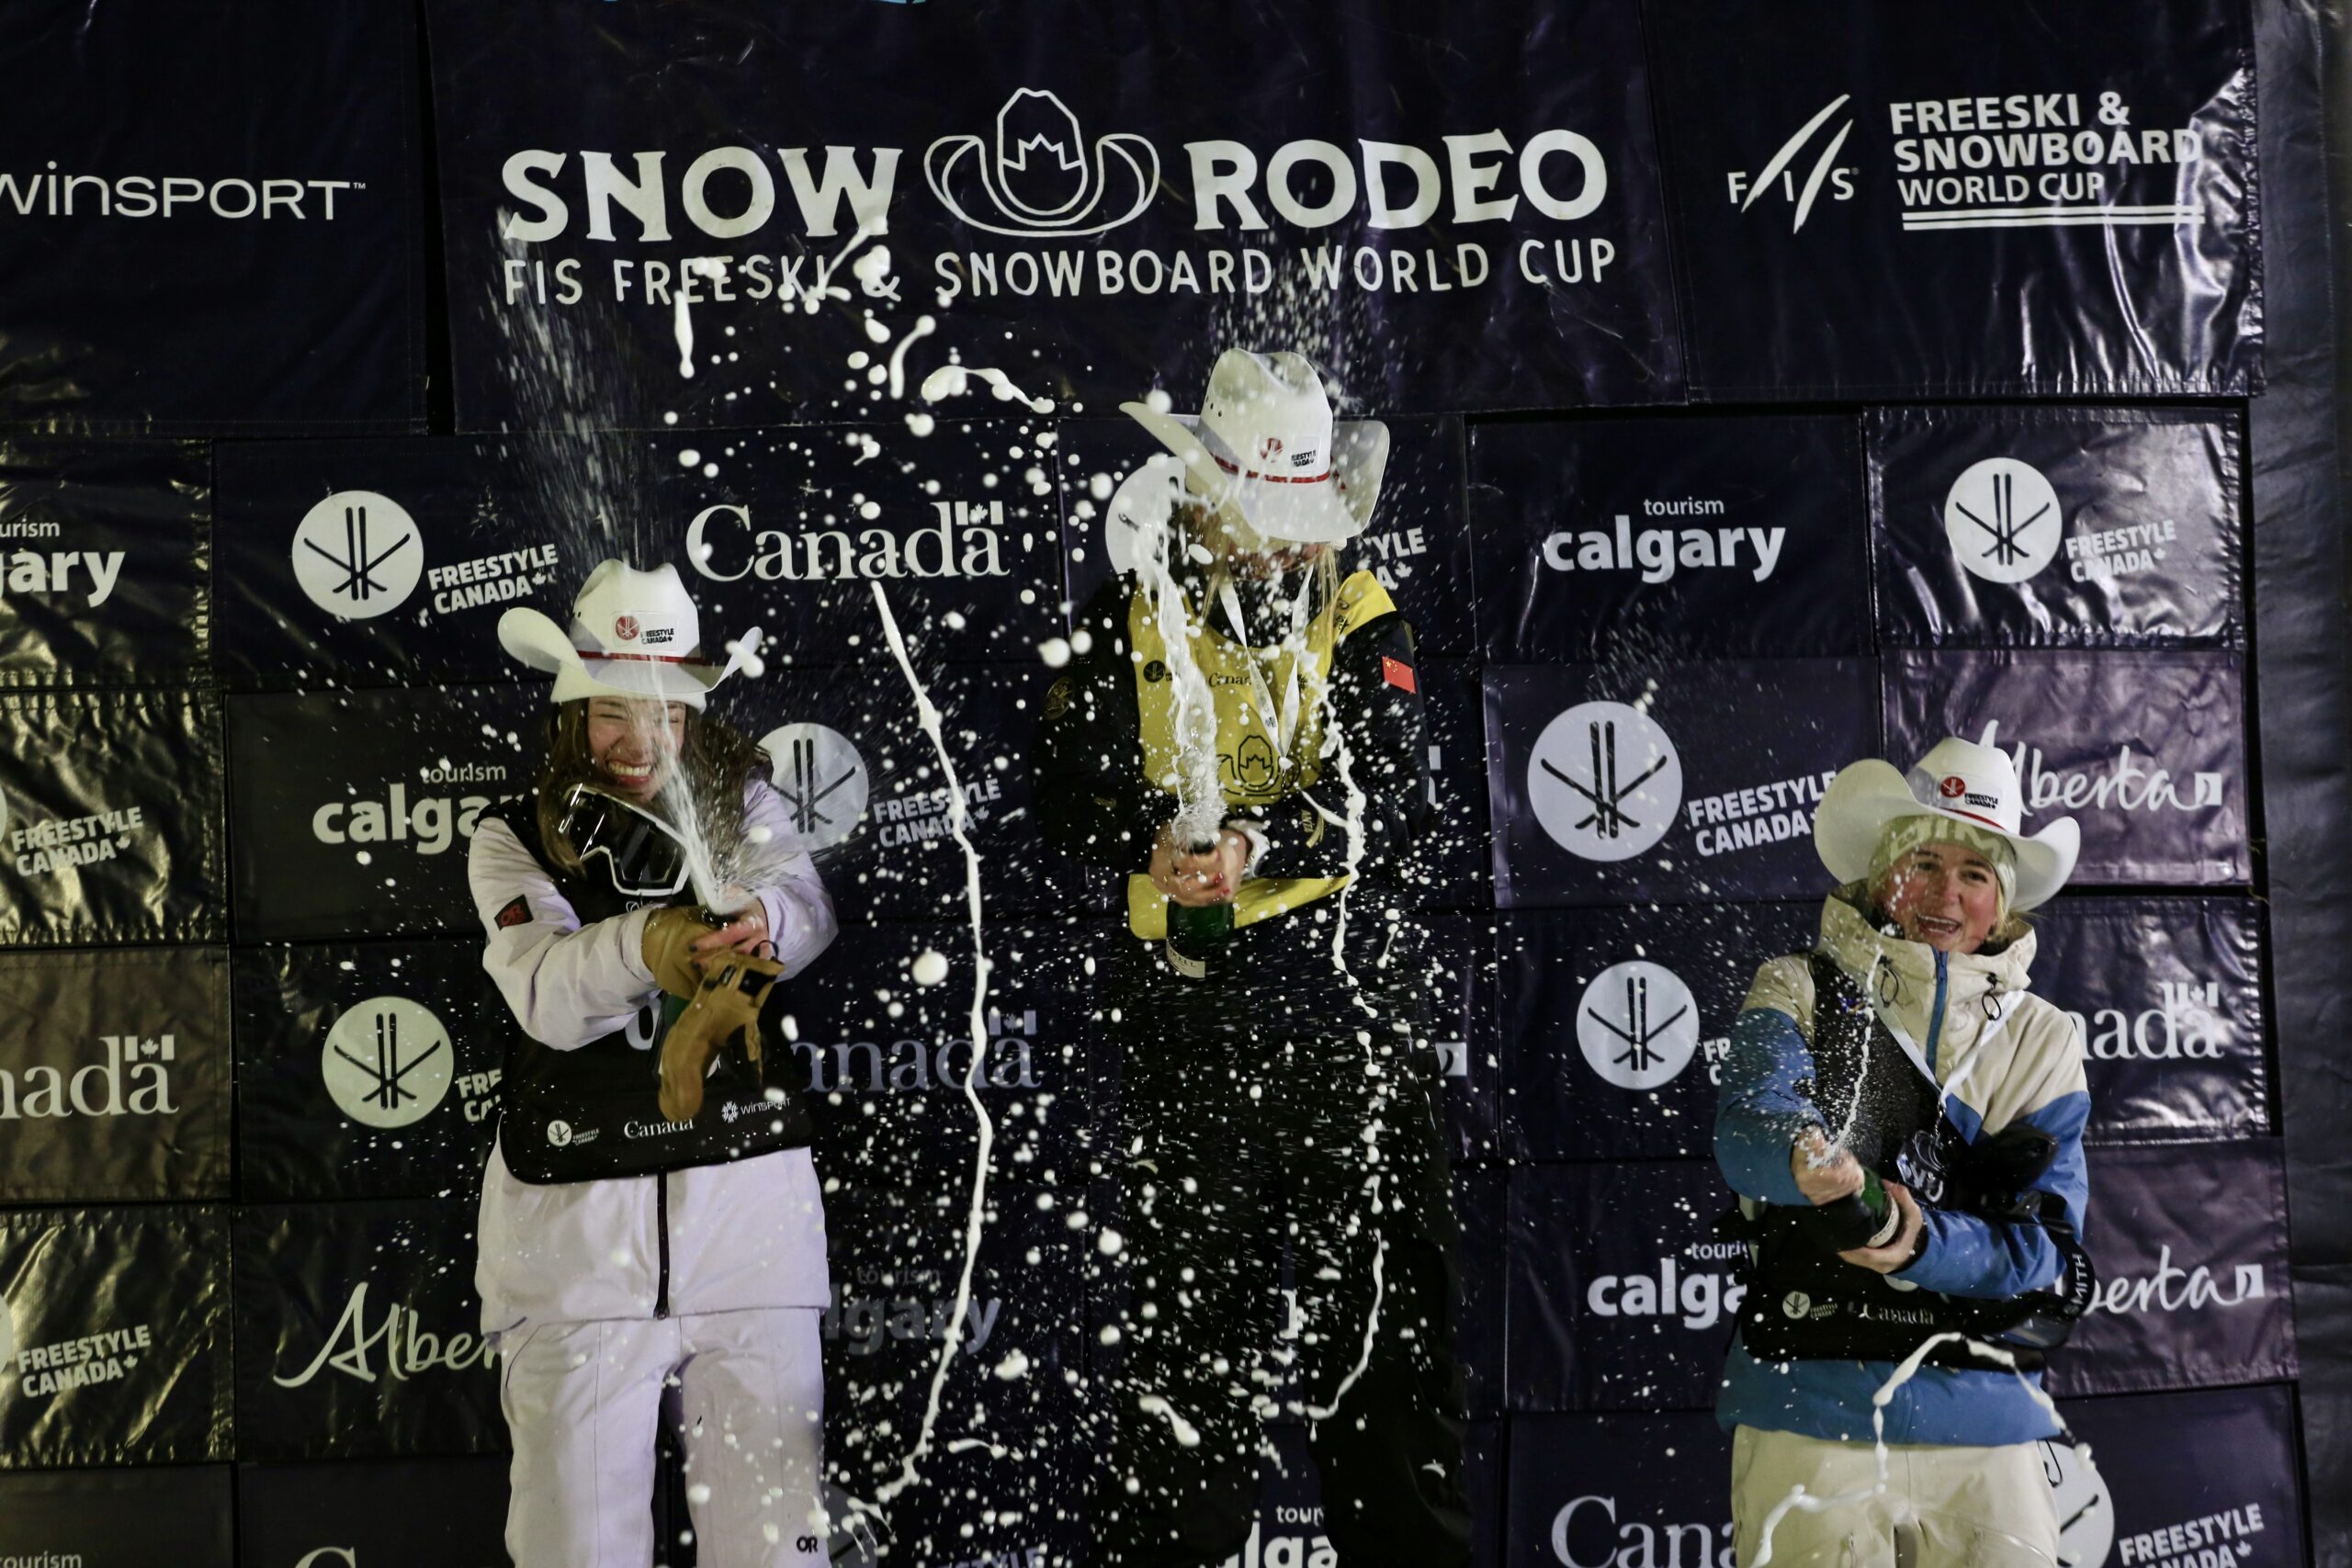 Atkin snares silver in second Calgary World Cup